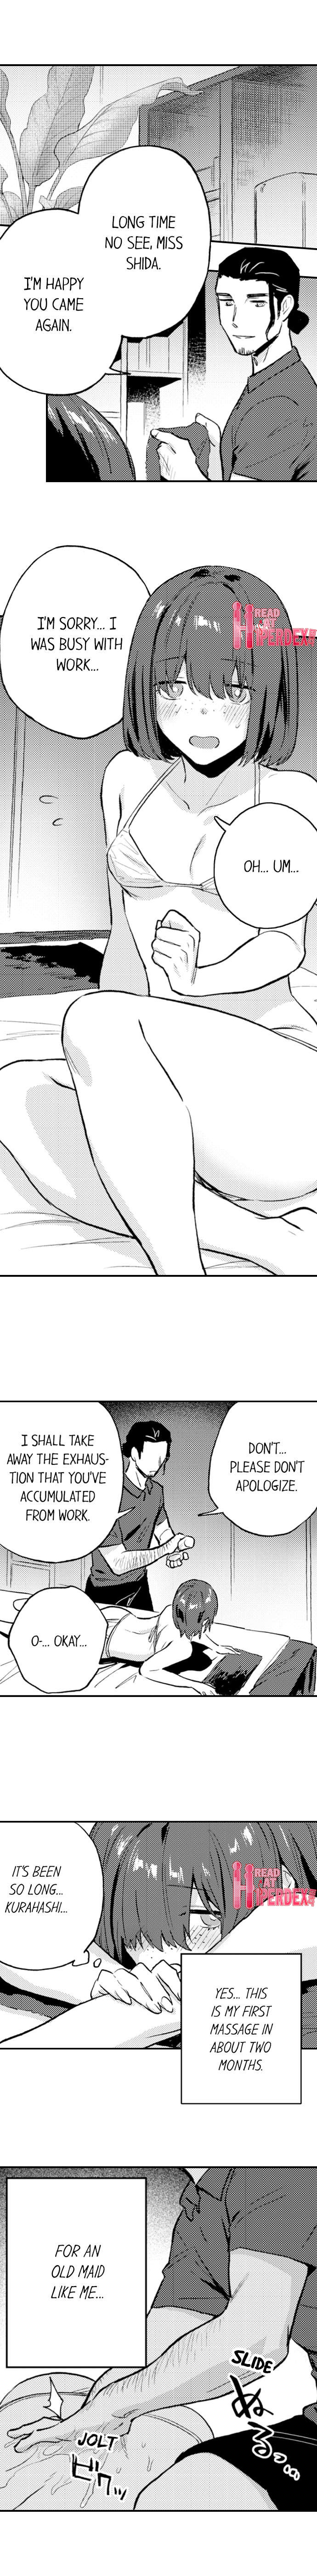 The Massage ♂♀ The Pleasure of Full Course Sex - Chapter 1 Page 2